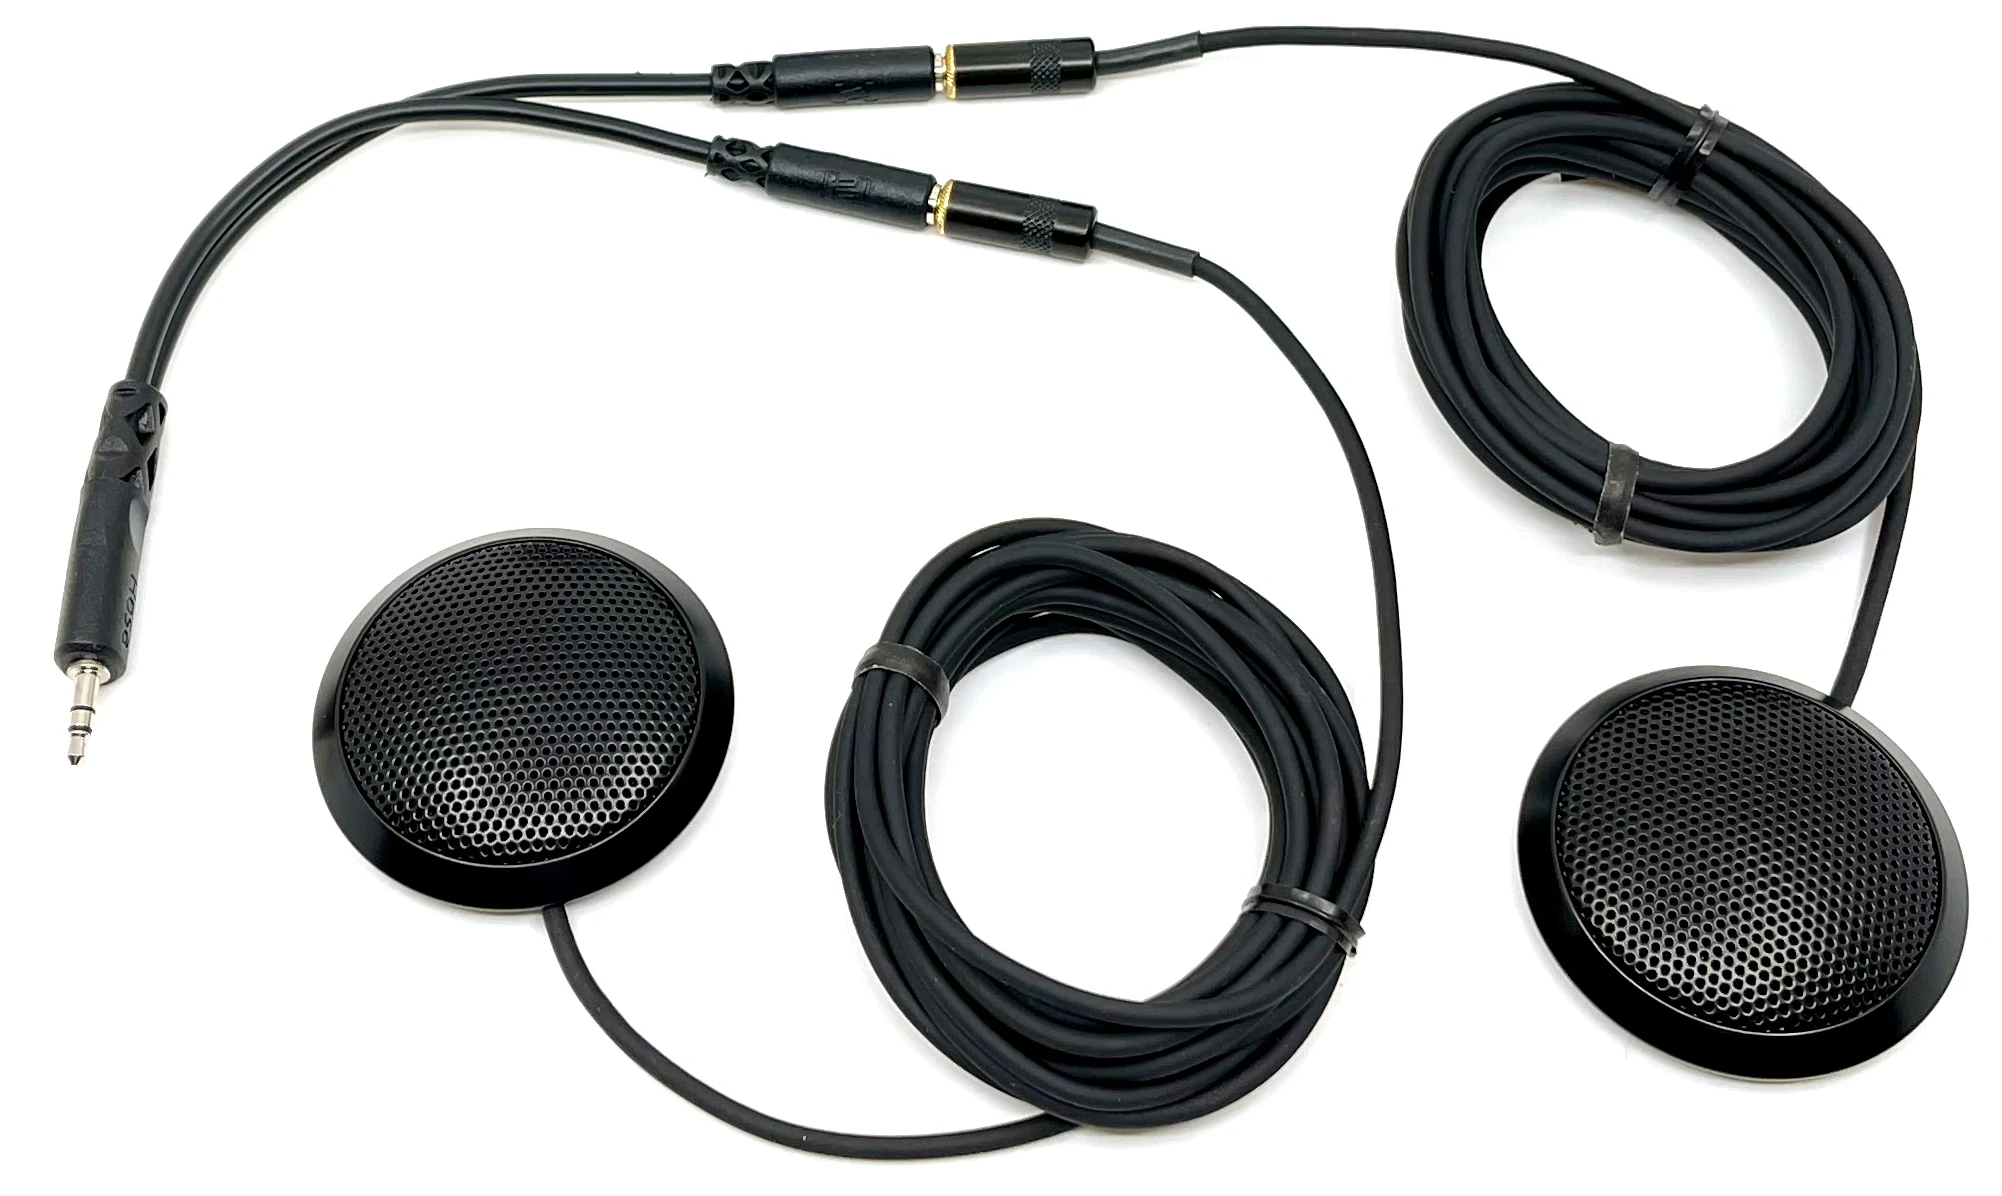 Double ultra-high gain Omnidirectional Boundary microphone – our best! Questions & Answers